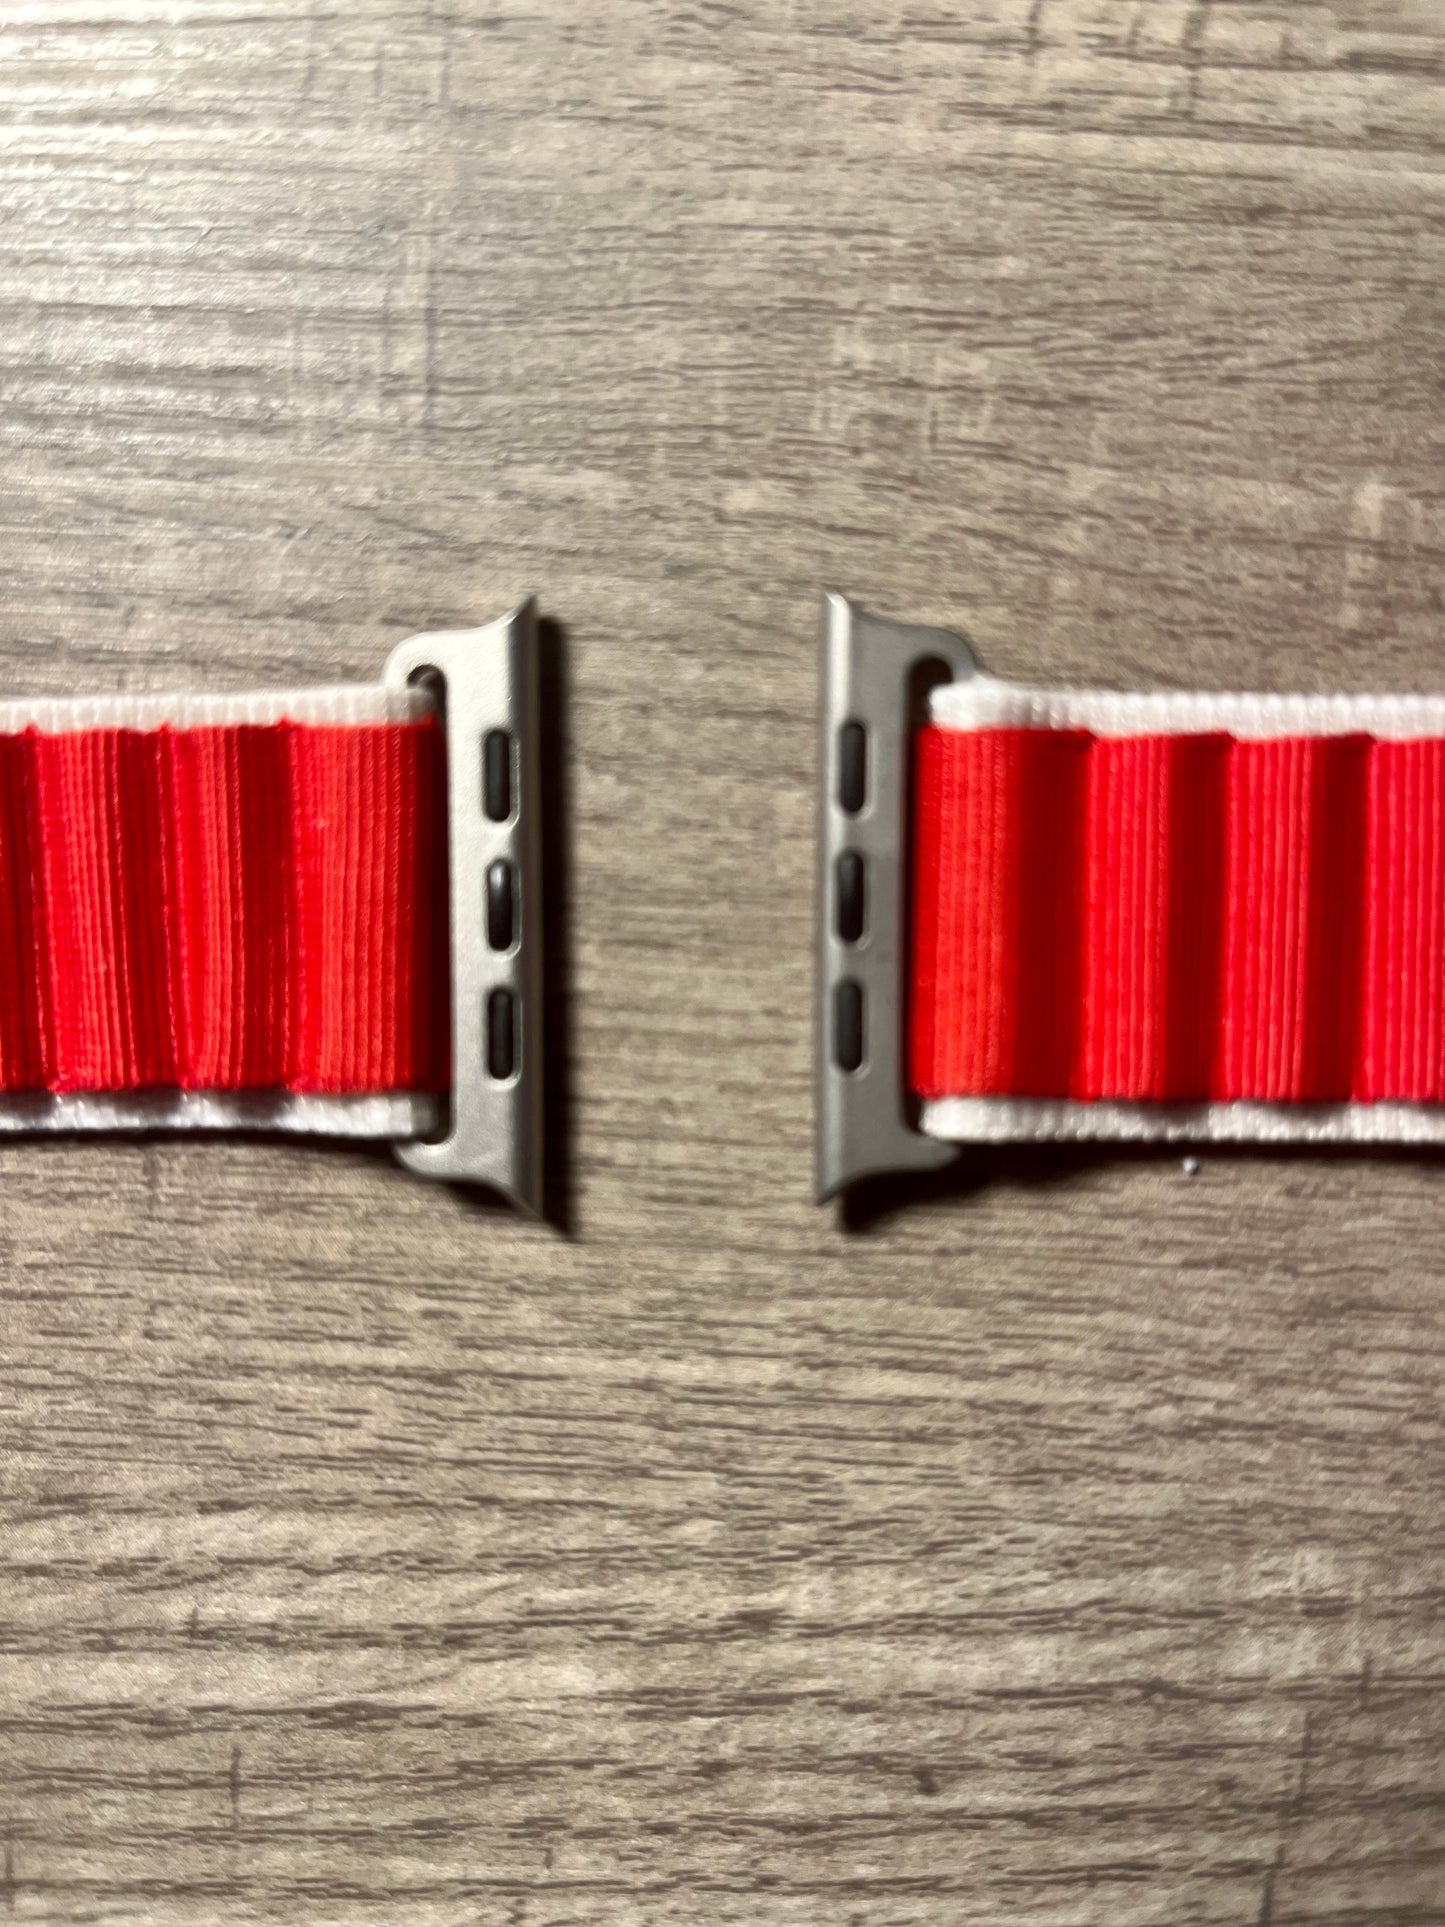 Red and White ripple nylon - Loop - G-Clasp